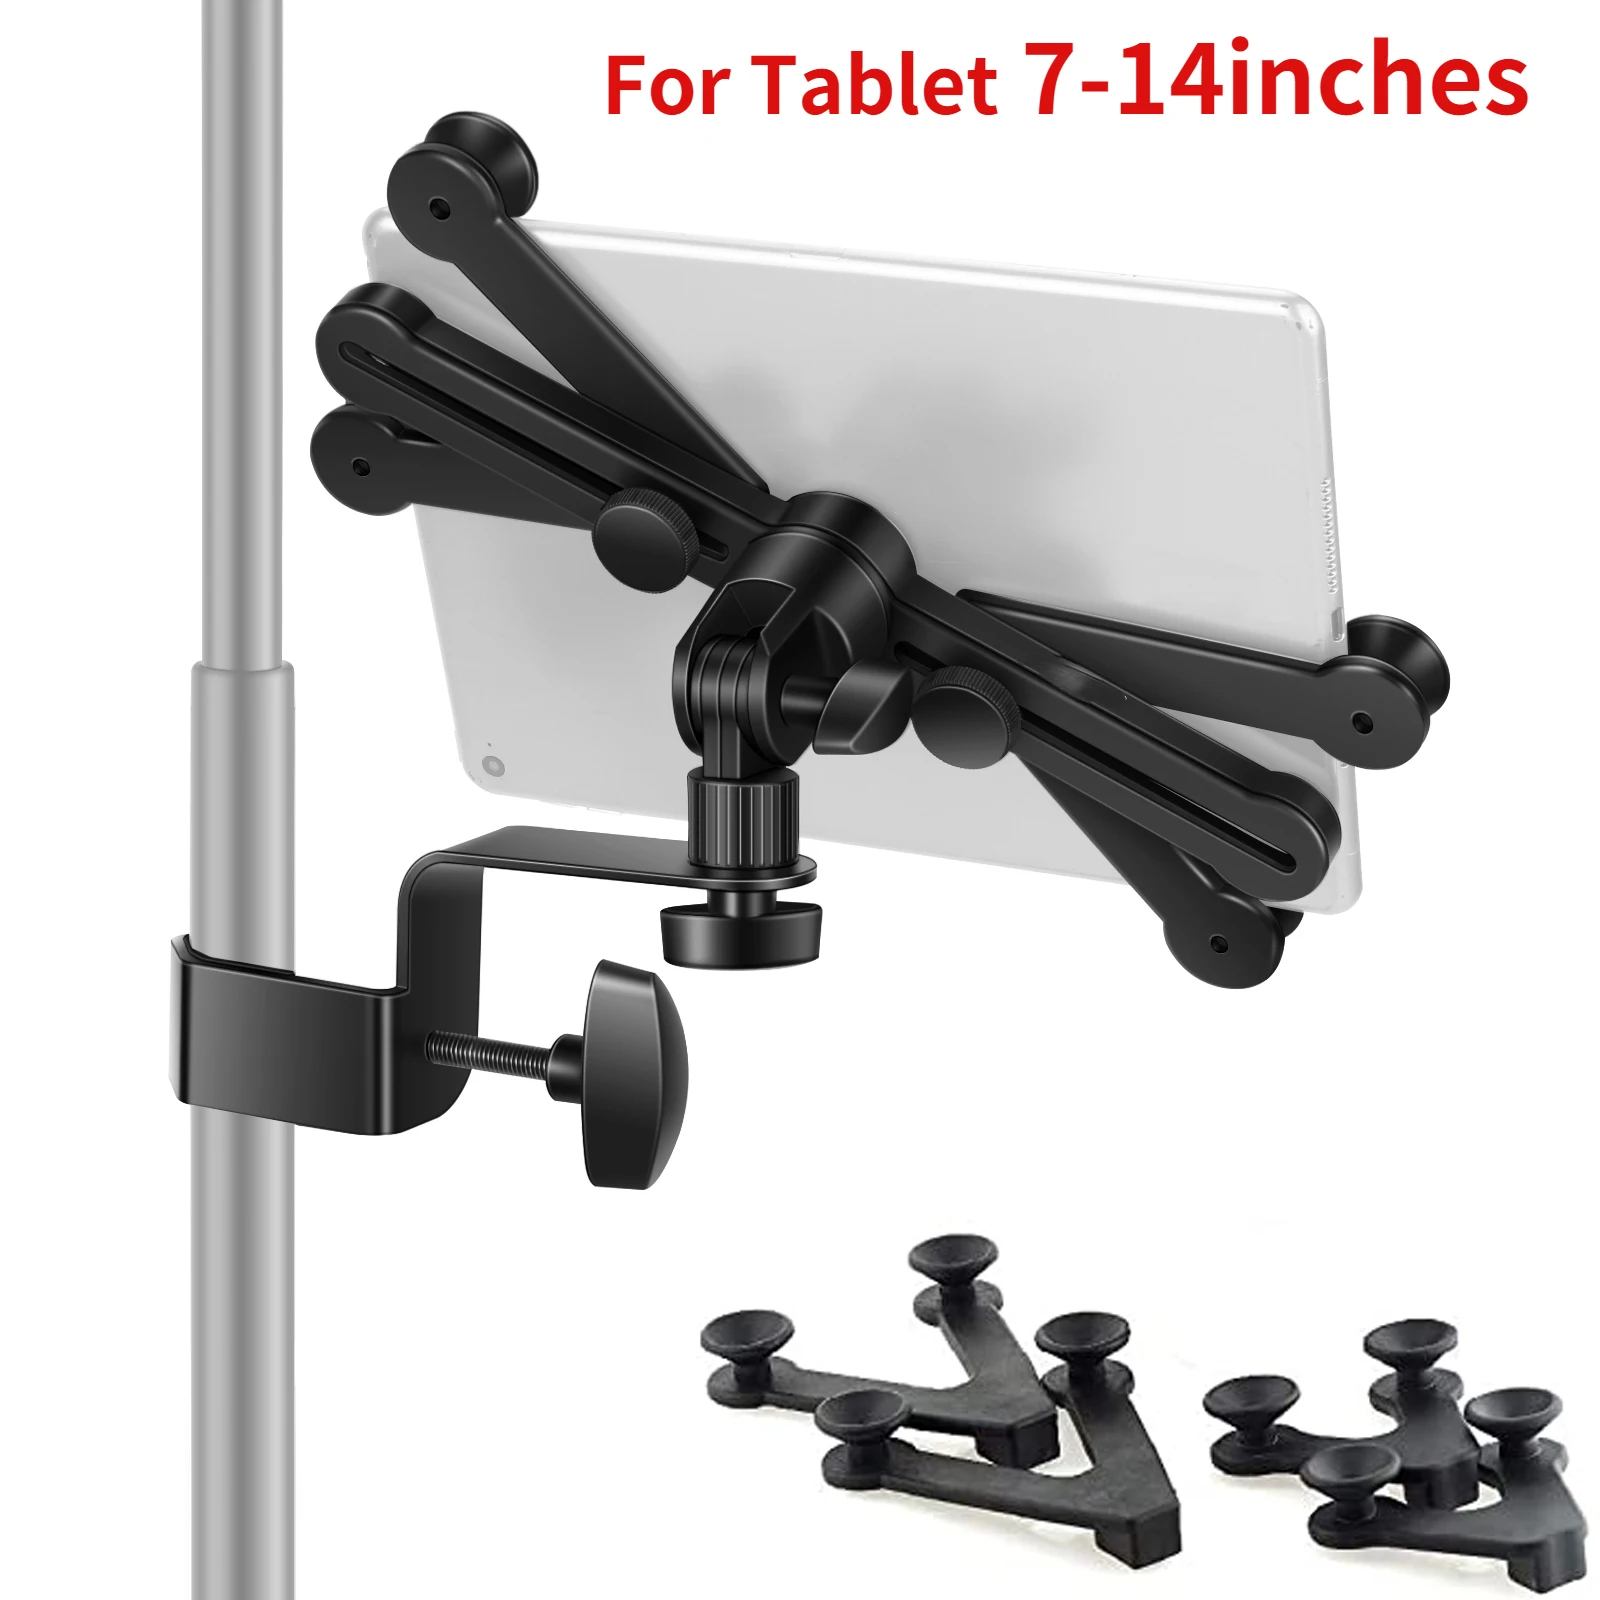 

New 7-14 inches Adjustable Tablet Holder Mount 360 Degree Swivel Clamp For Microphone Stand for Apple iPad Pro Air Mini Google